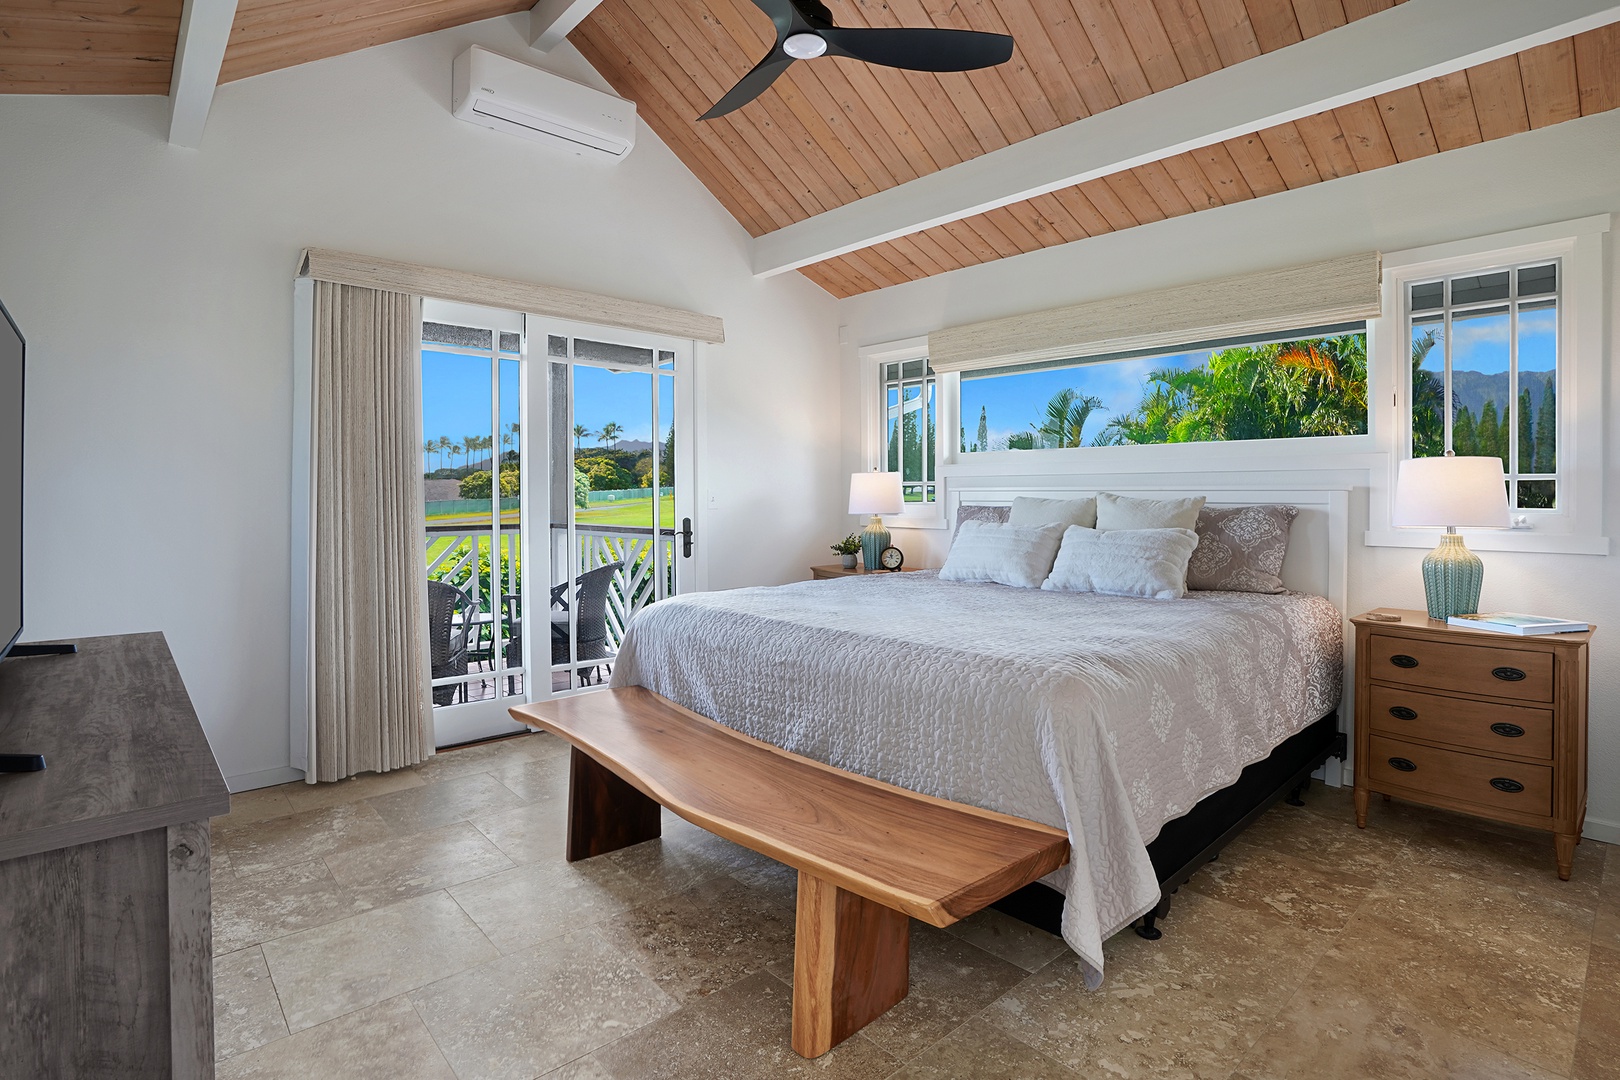 Princeville Vacation Rentals, Kaiana Villa - Wake up every morning to breathtaking views of the lush garden landscape